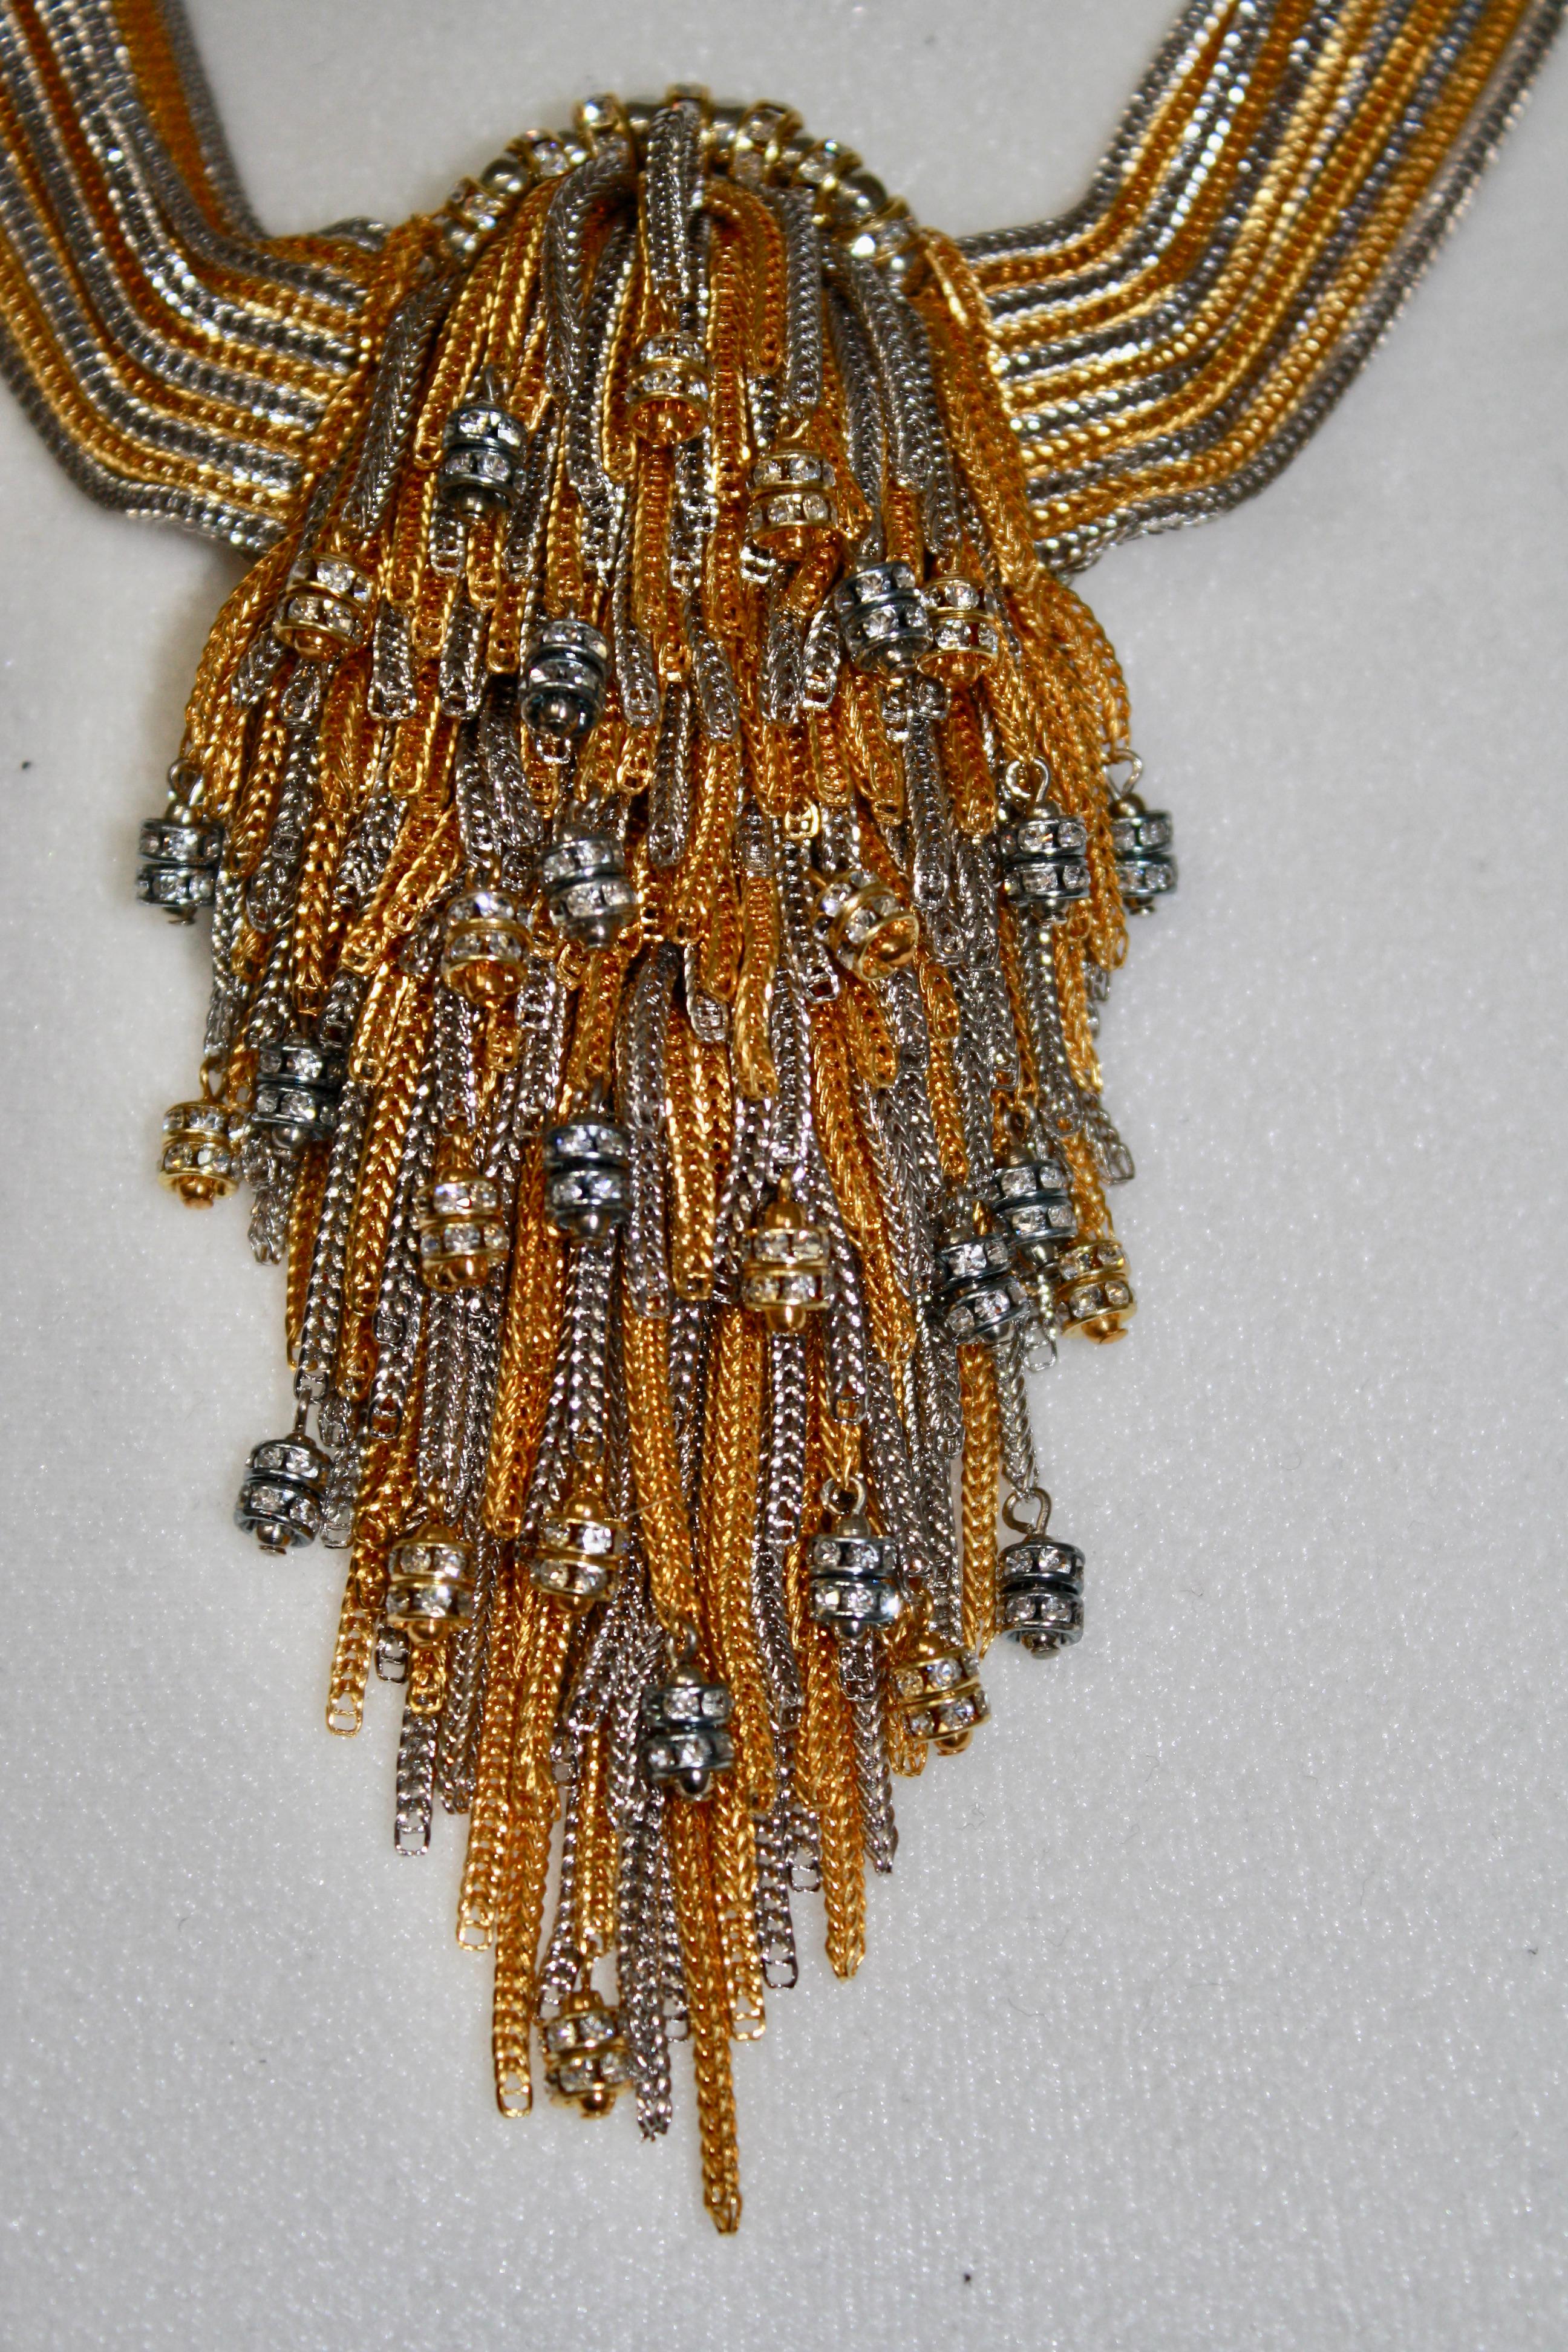 14 strands of gold and silver chains with center short tassel finished with Swarovski crystal rondelles.
4